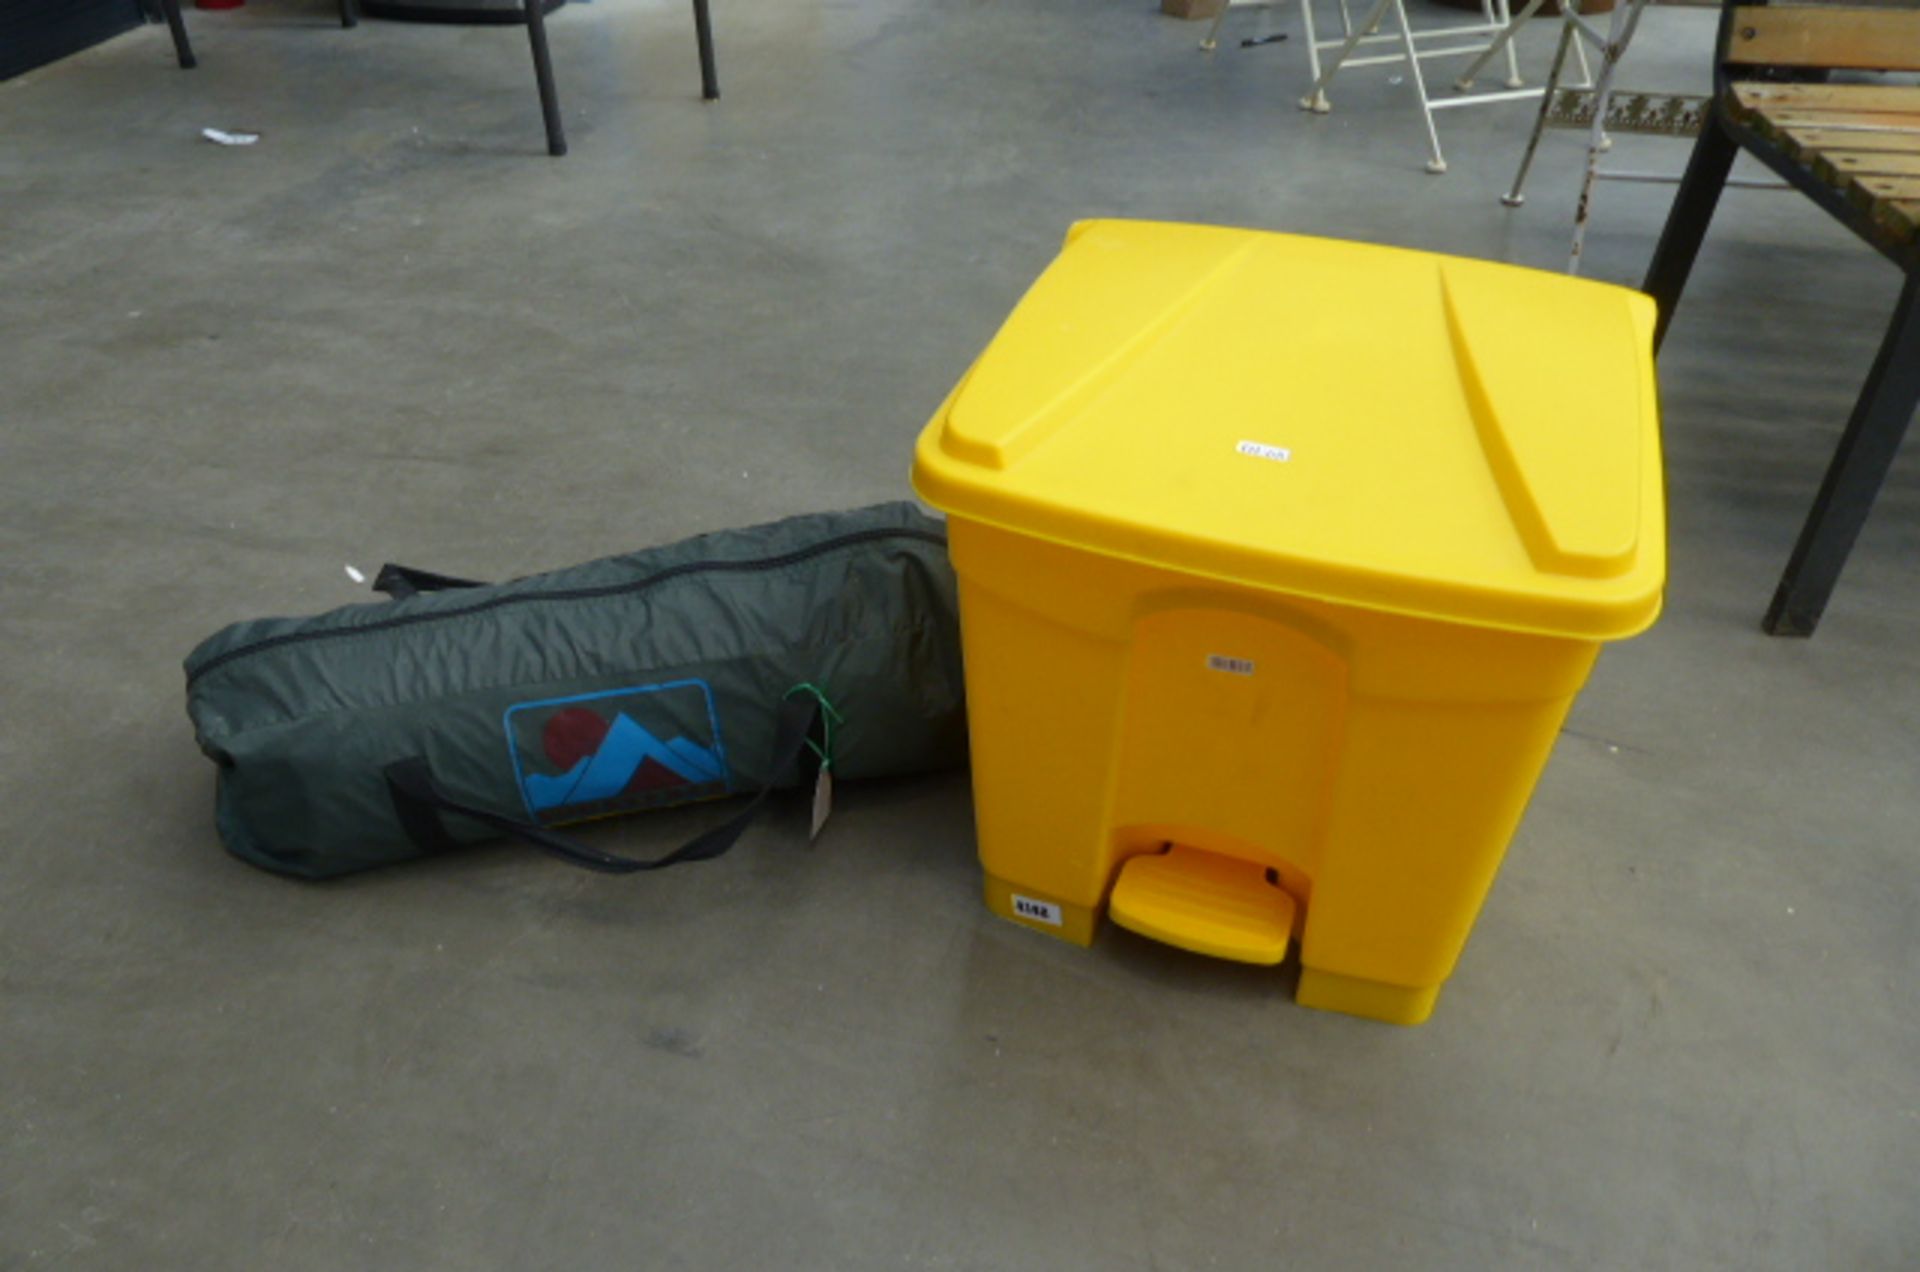 Small 2 person tent and a yellow plastic bin